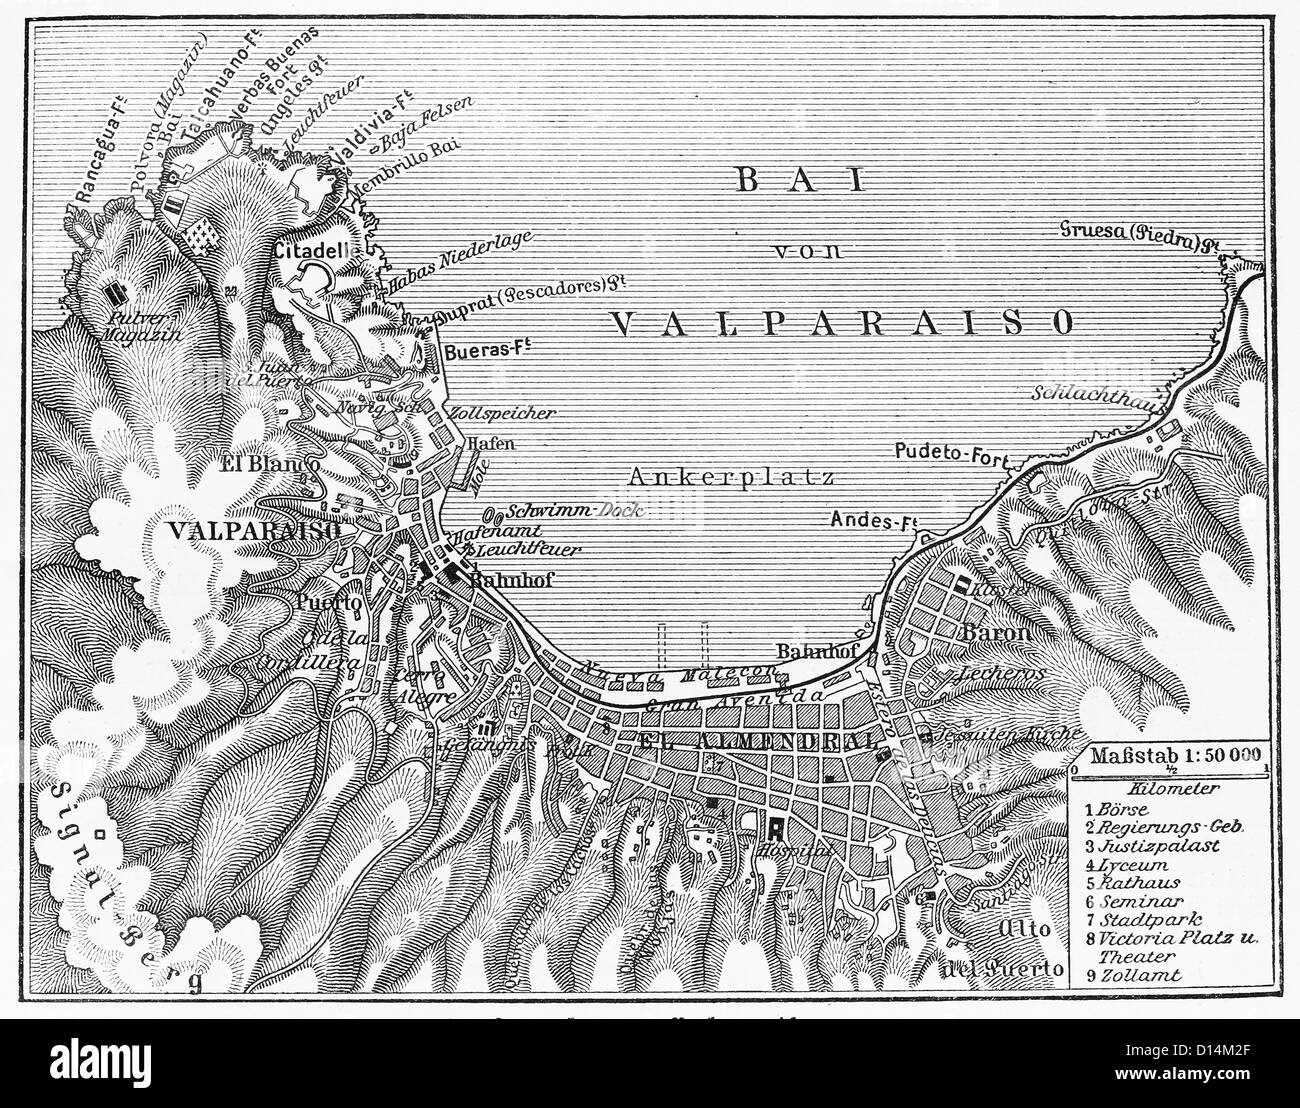 Vintage map of Valparaiso, Chile at the end of 19th century Stock Photo